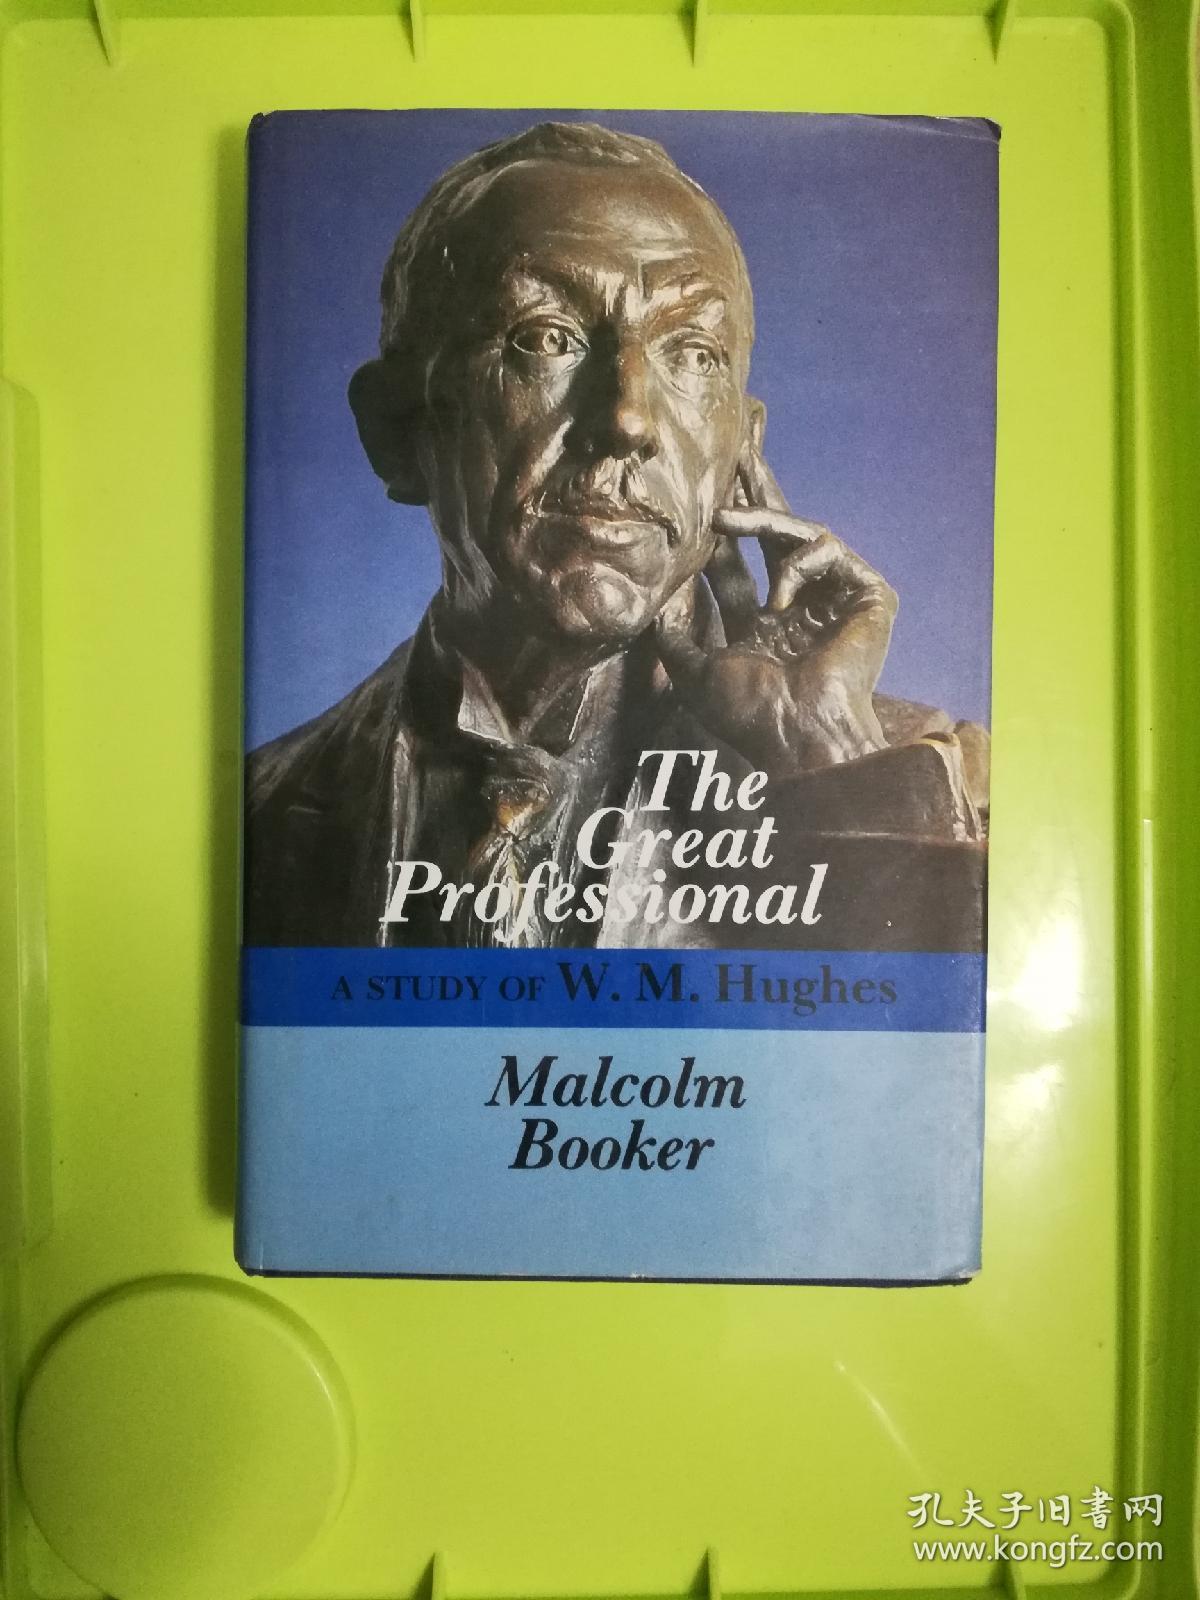 The great professional
A study of W.M.hughes